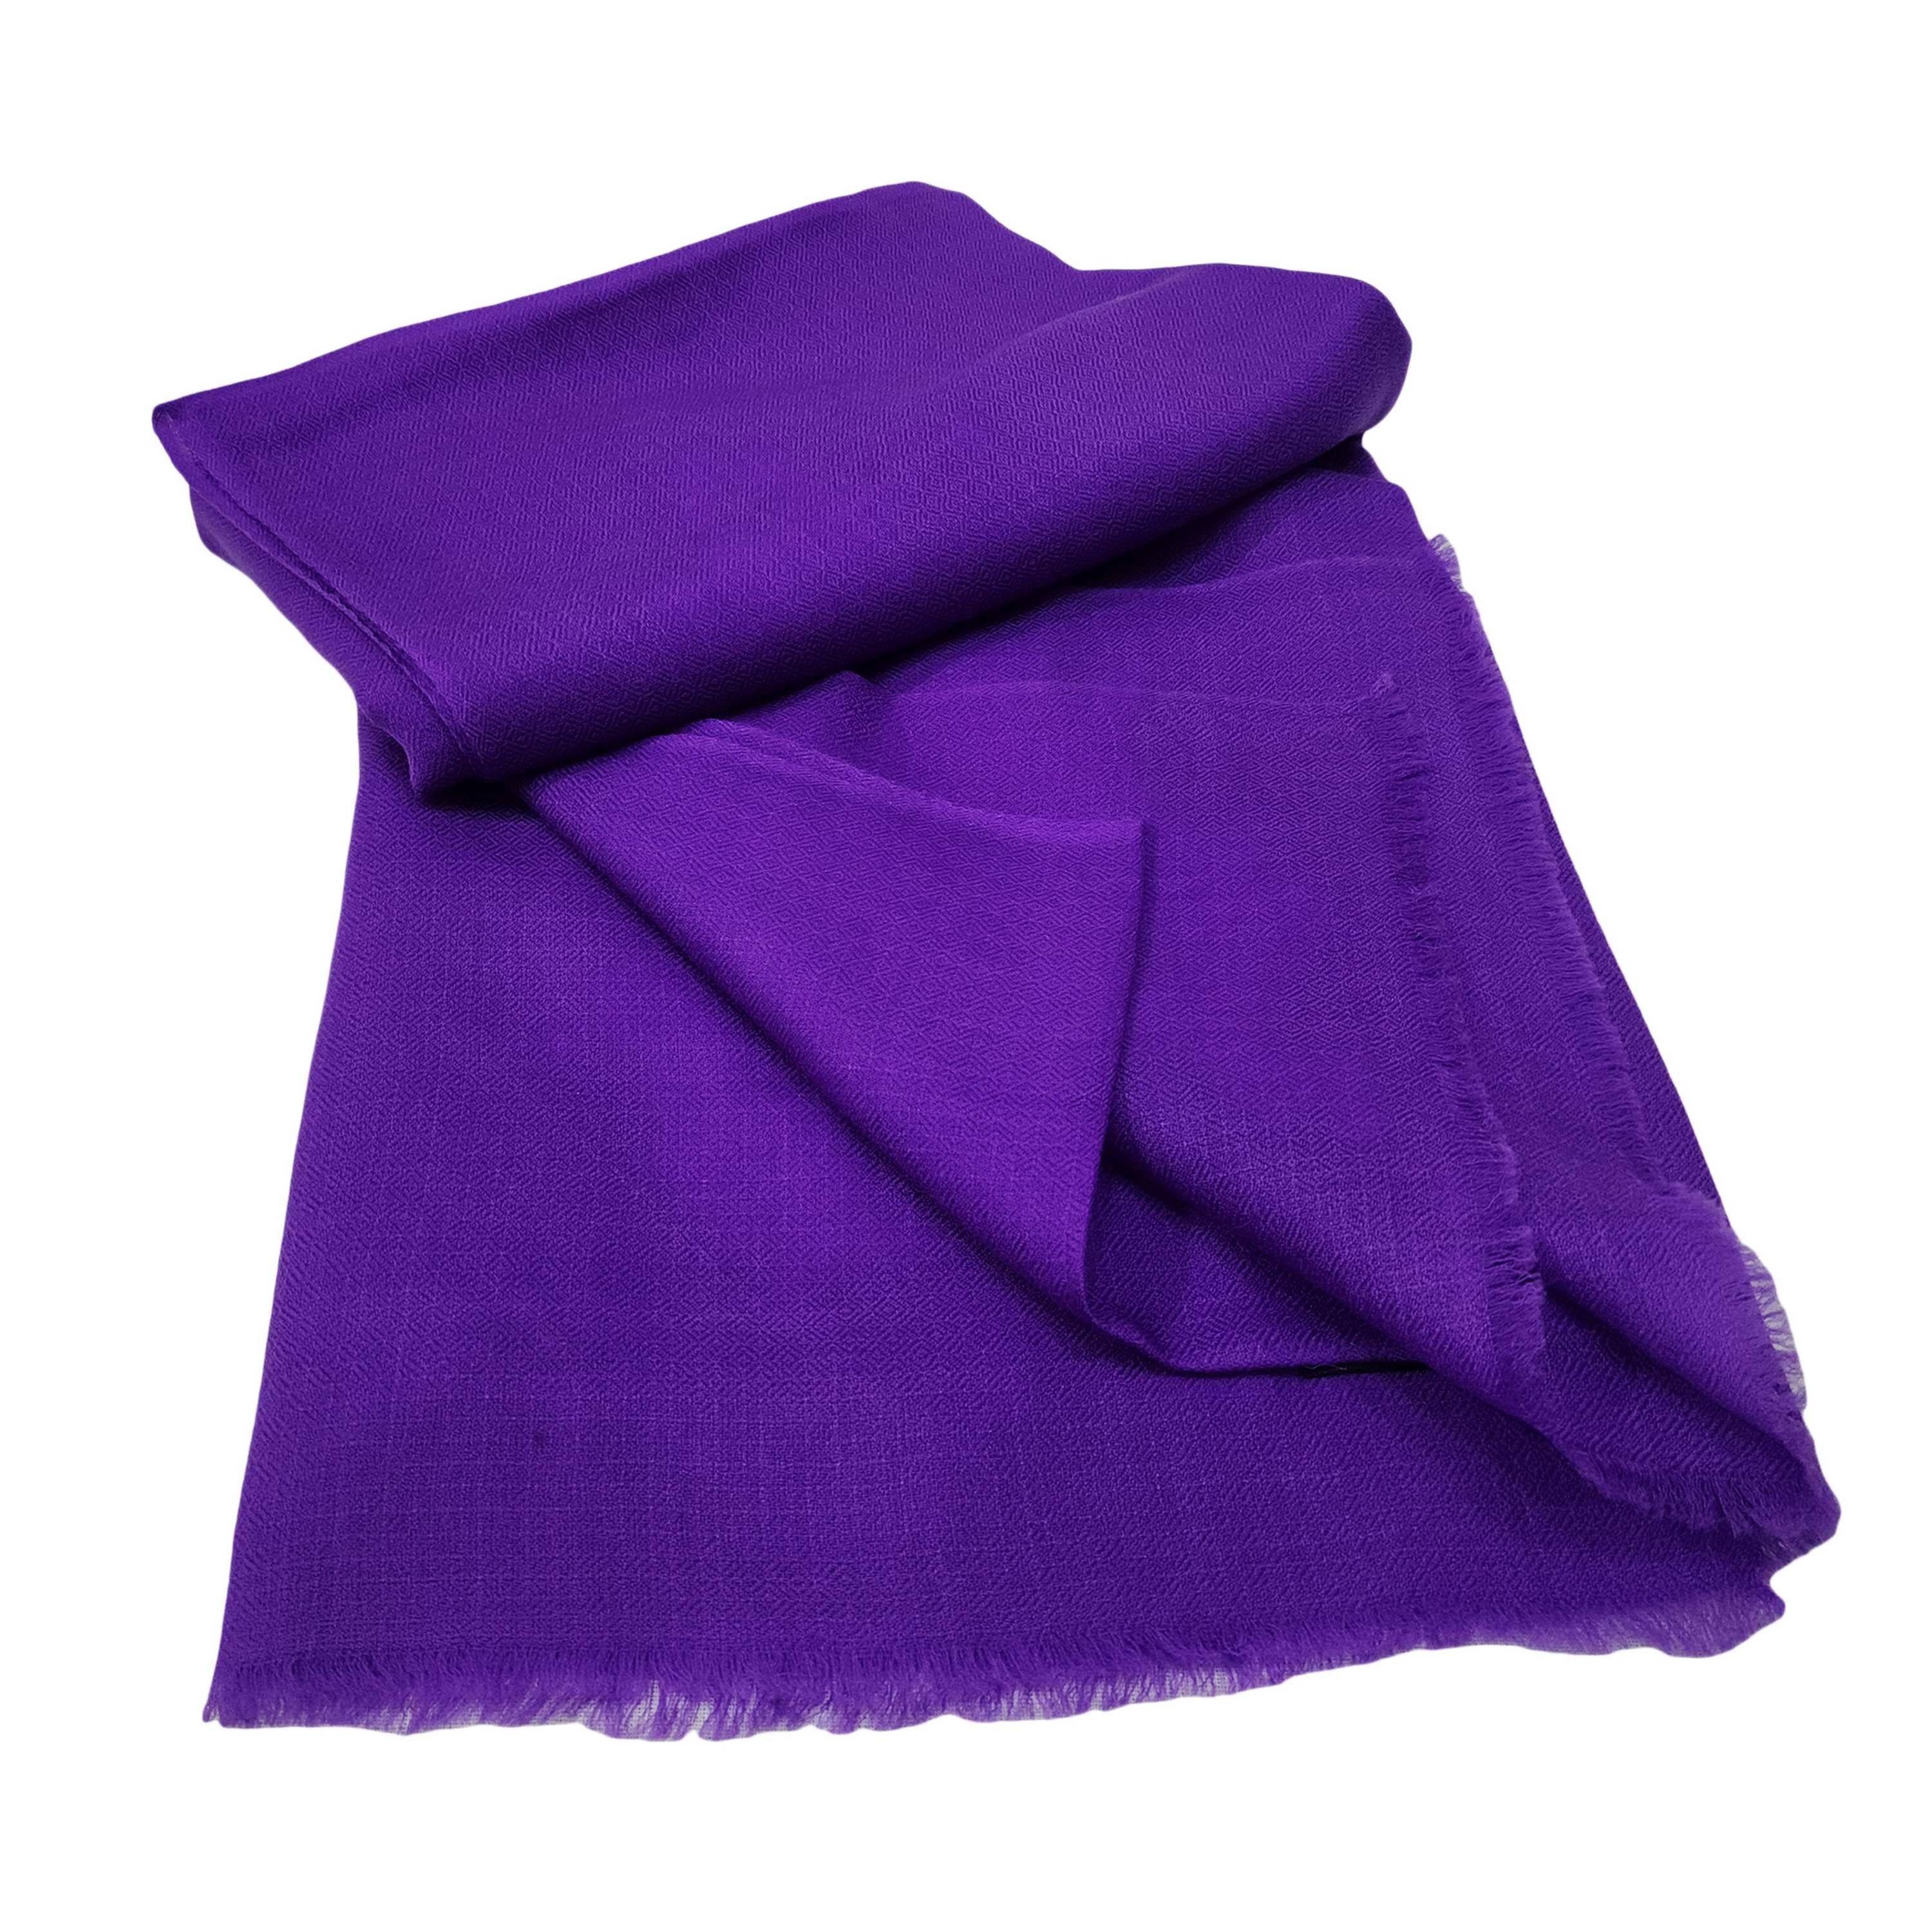 Ring Shawl, A Thin, Soft, And Light Shawl For All-weather Use, Two-ply Wool, Color purple